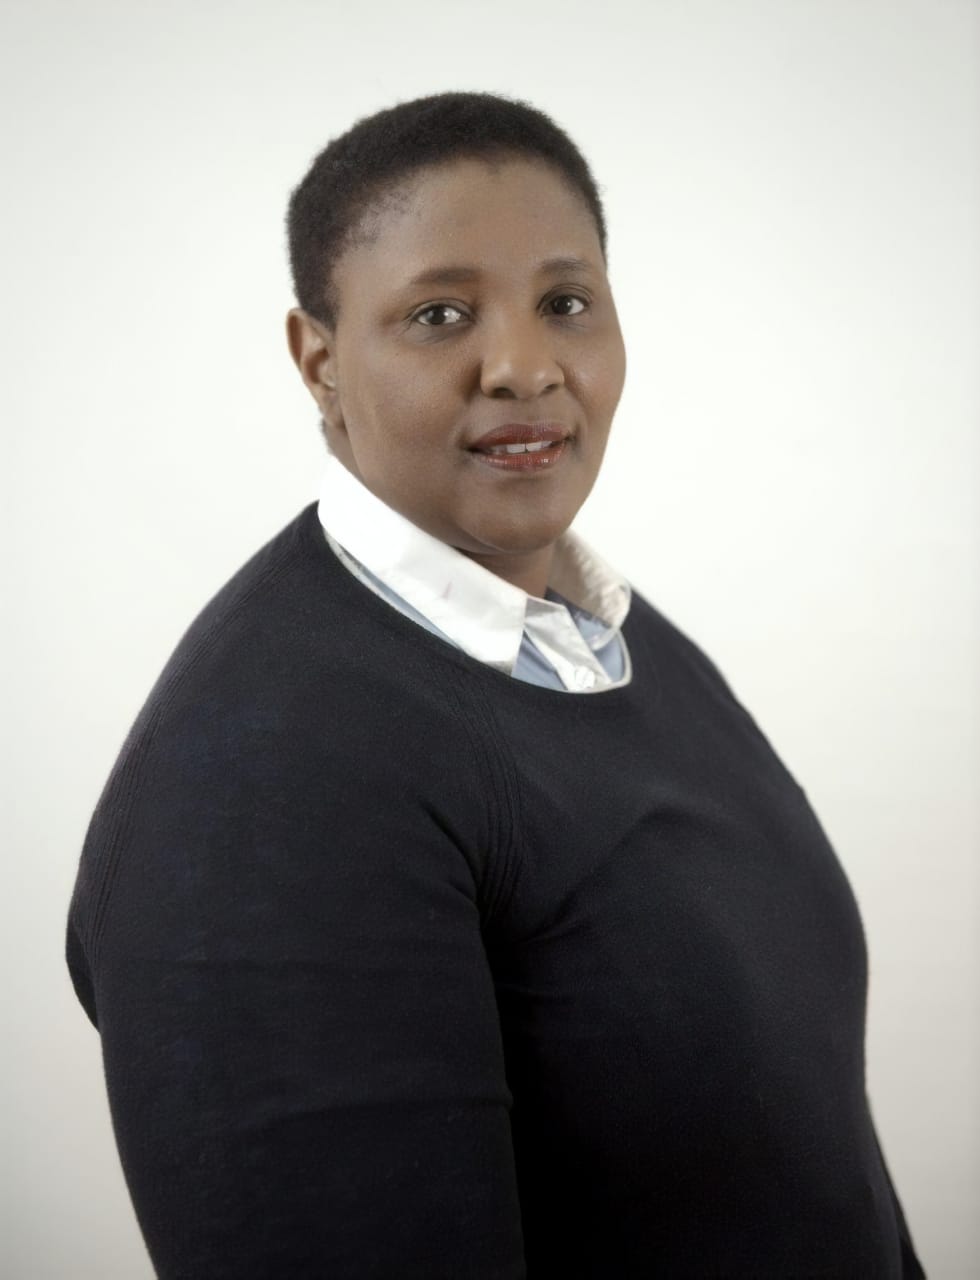 Ms. Neliswa Nkani, Hub Head – Middle East, India and South East Asia, South African Tourism